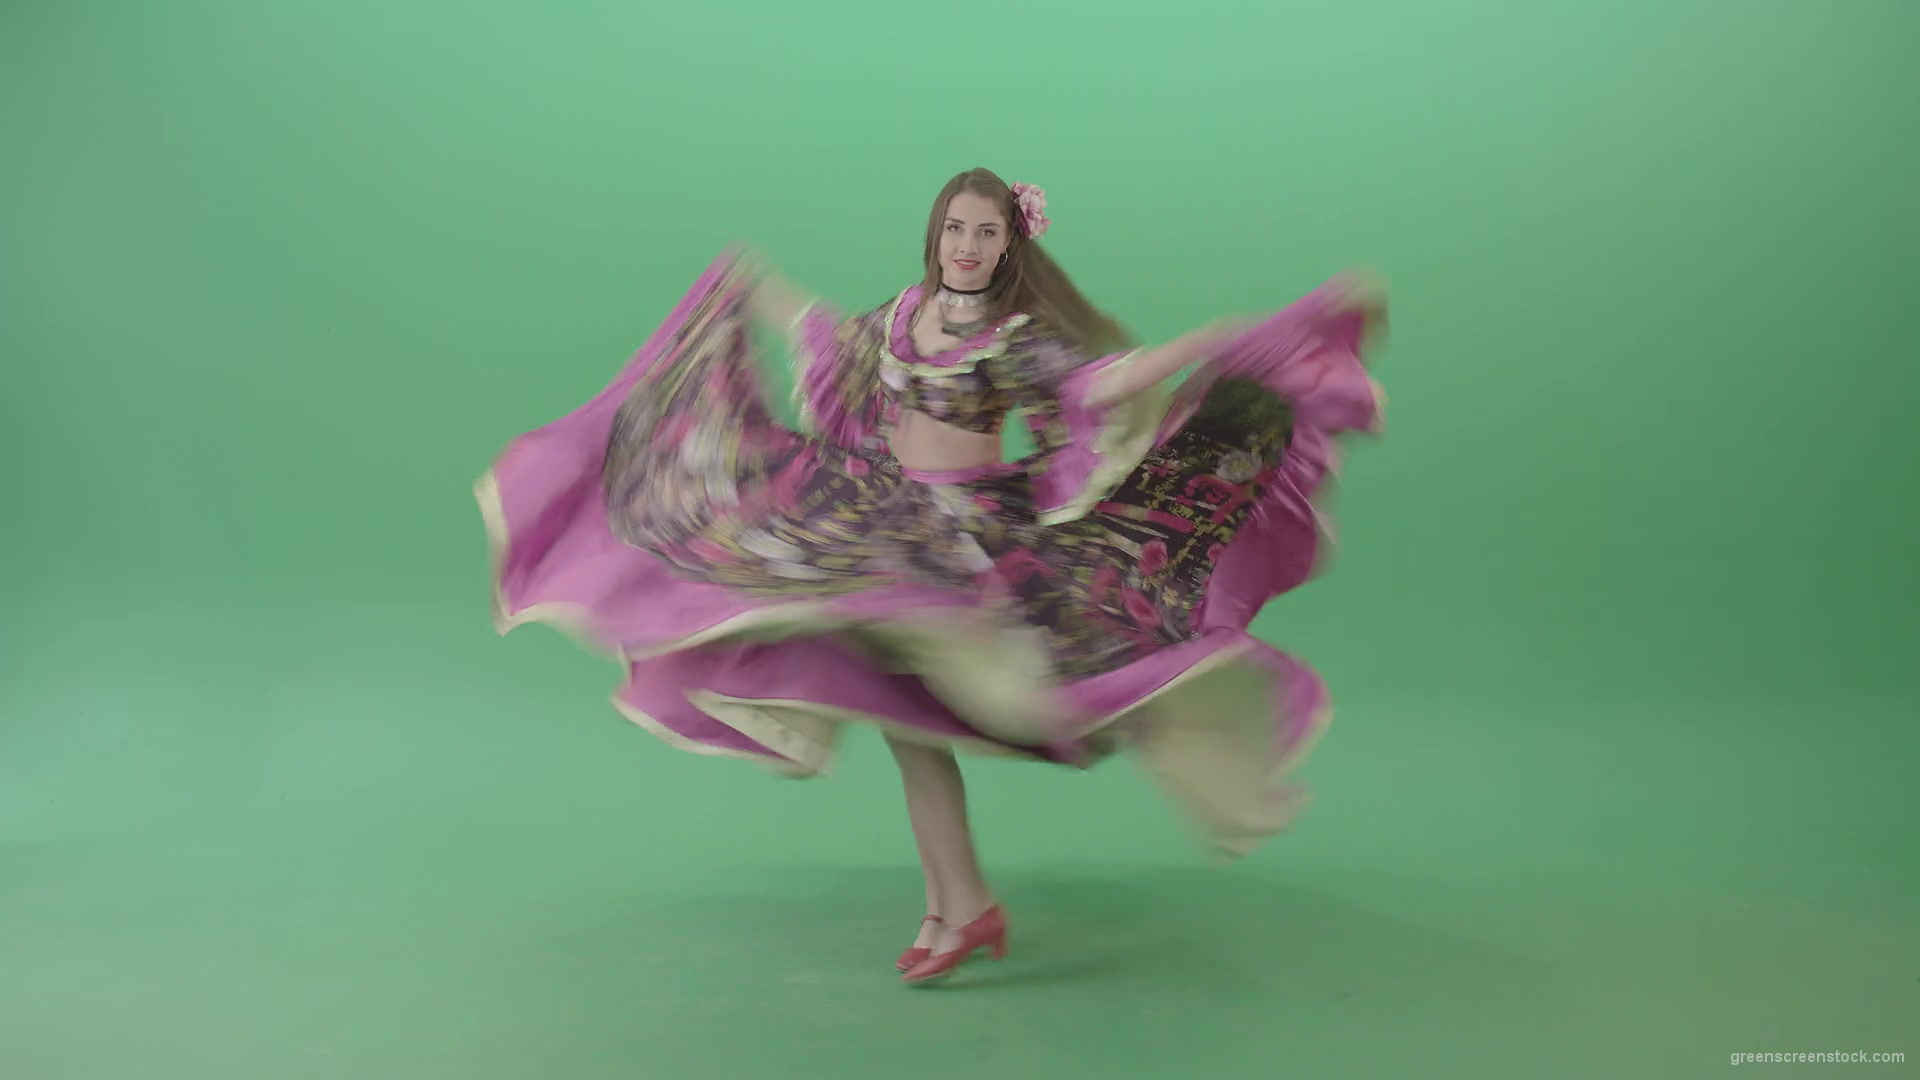 Romatic-moldova-girl-dancing-in-roma-gypsy-dress-isolated-on-green-screen-4K-stock-video-footage-1920_007 Green Screen Stock